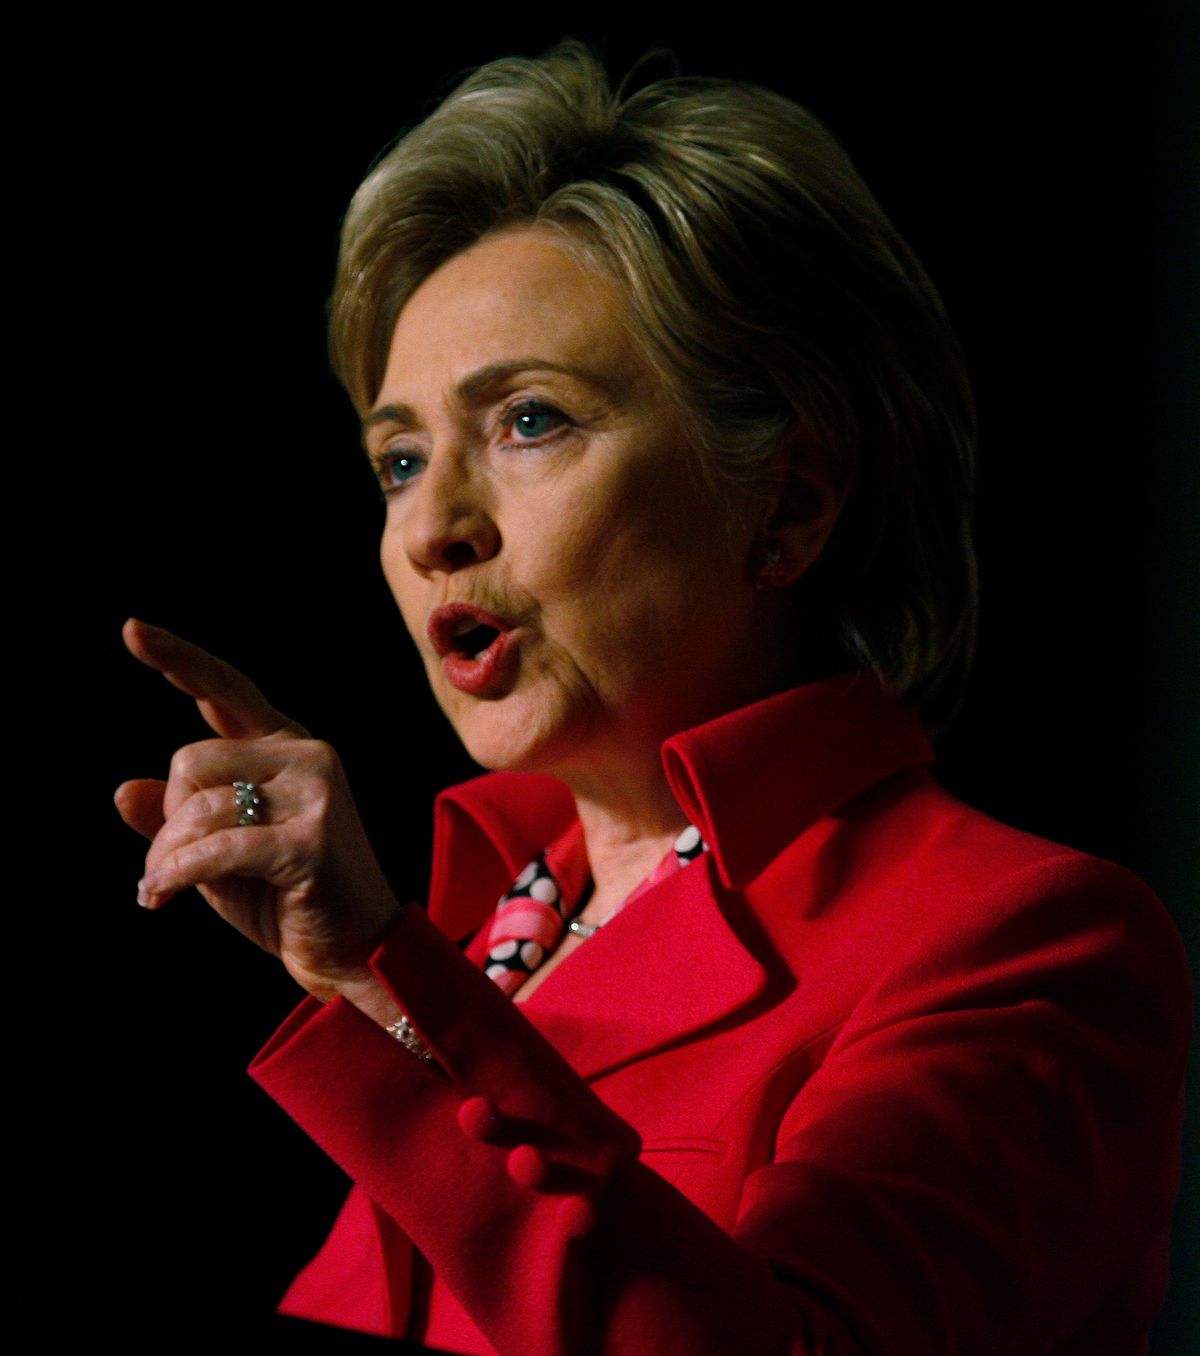 US Democratic presidential candidate Senator Hillary Clinton (D-NY) speaks during an appearance at the 38th Constitutional Convention of the Pennsylvania American Federation of Labor and Congress of Industrial Organizations (AFL-CIO) in Philadelphia, Pennsylvania April 1, 2008.  REUTERS/Tim Shaffer  (UNITED STATES)  US PRESIDENTIAL ELECTION CAMPAIGN 2008 (USA) (Reuters)